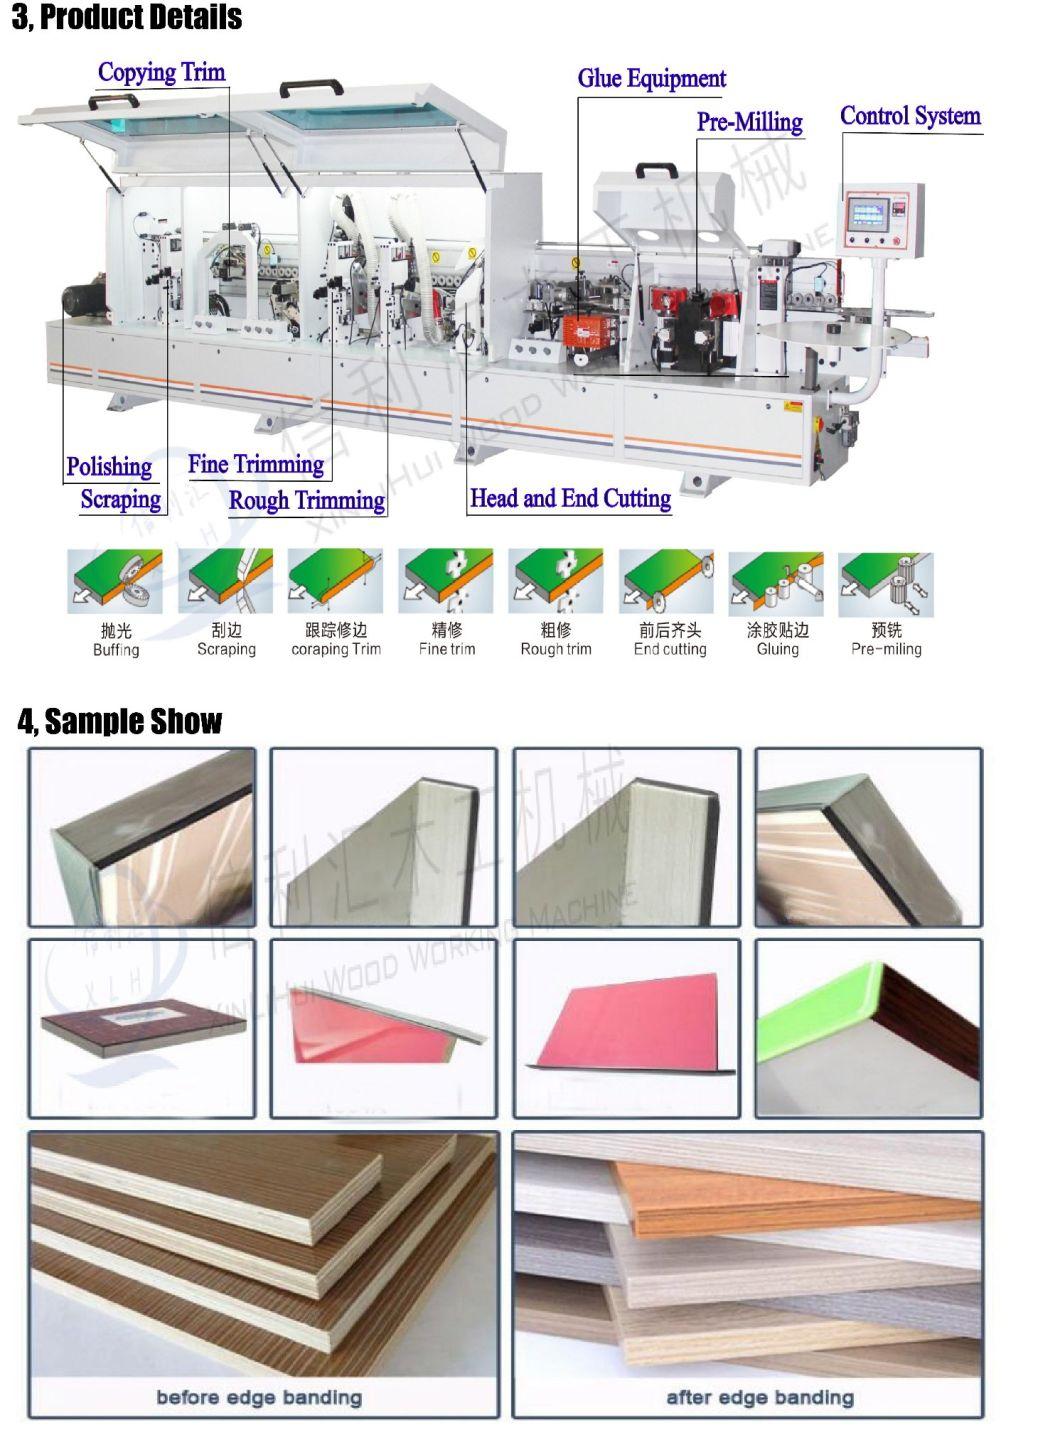 up and Down Slotting Xinlihui Brand Full Automatic Edge Banding Machine/ Wooden Furniture Making Machine Factory Low Price Cheap Price